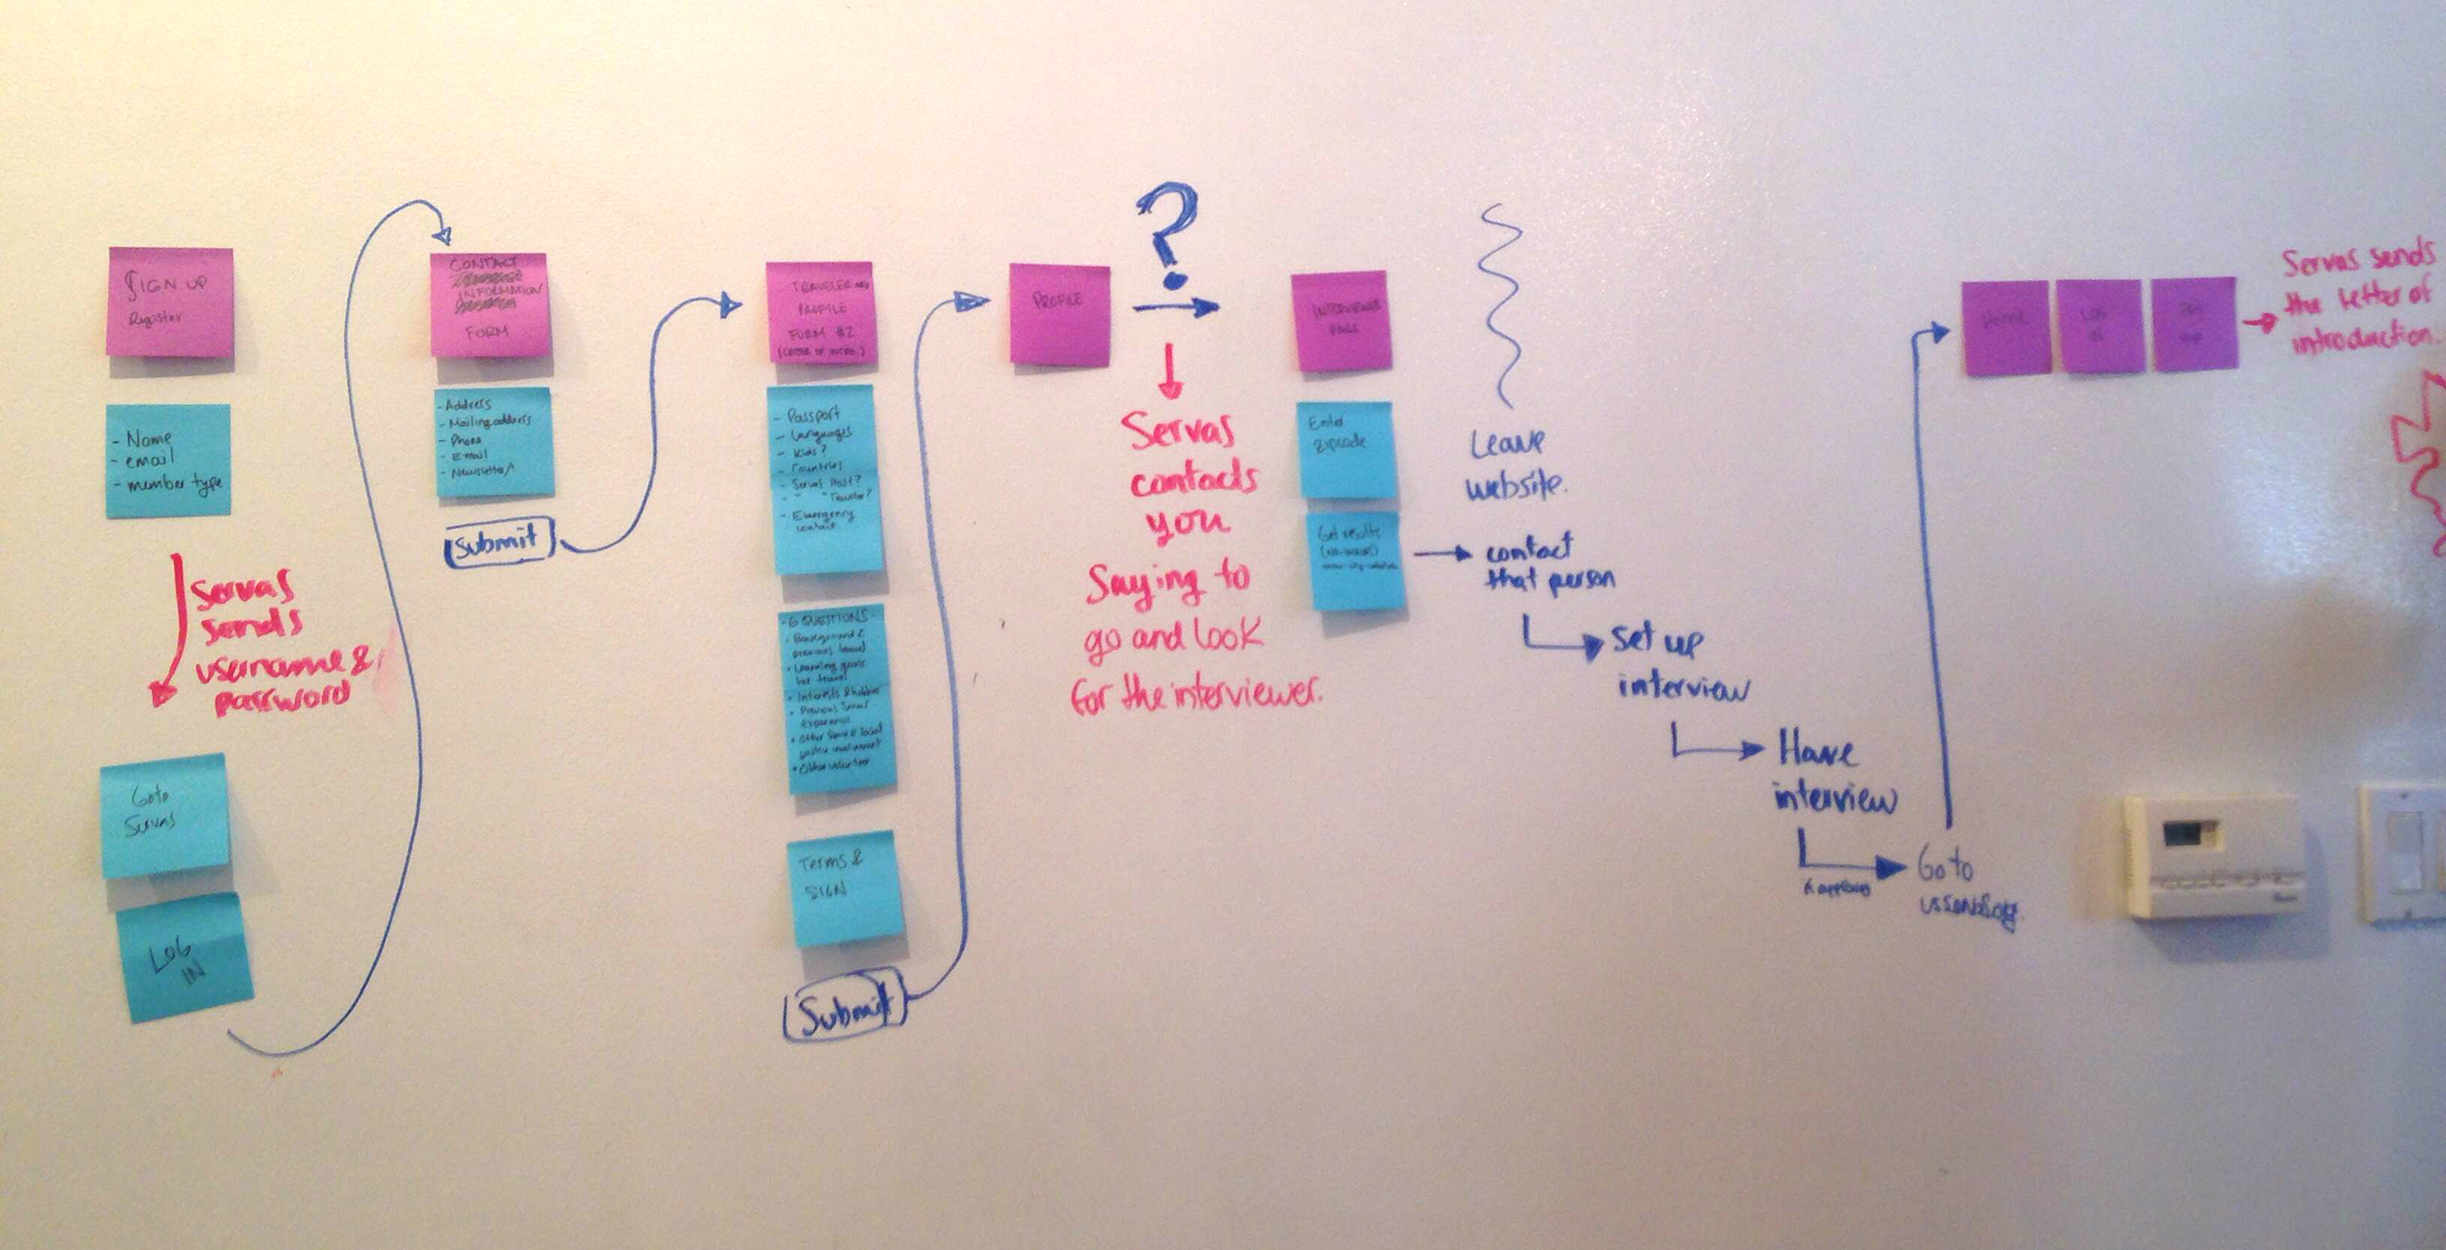 Image of the servas membership application userflow made with post its and markers on the wall